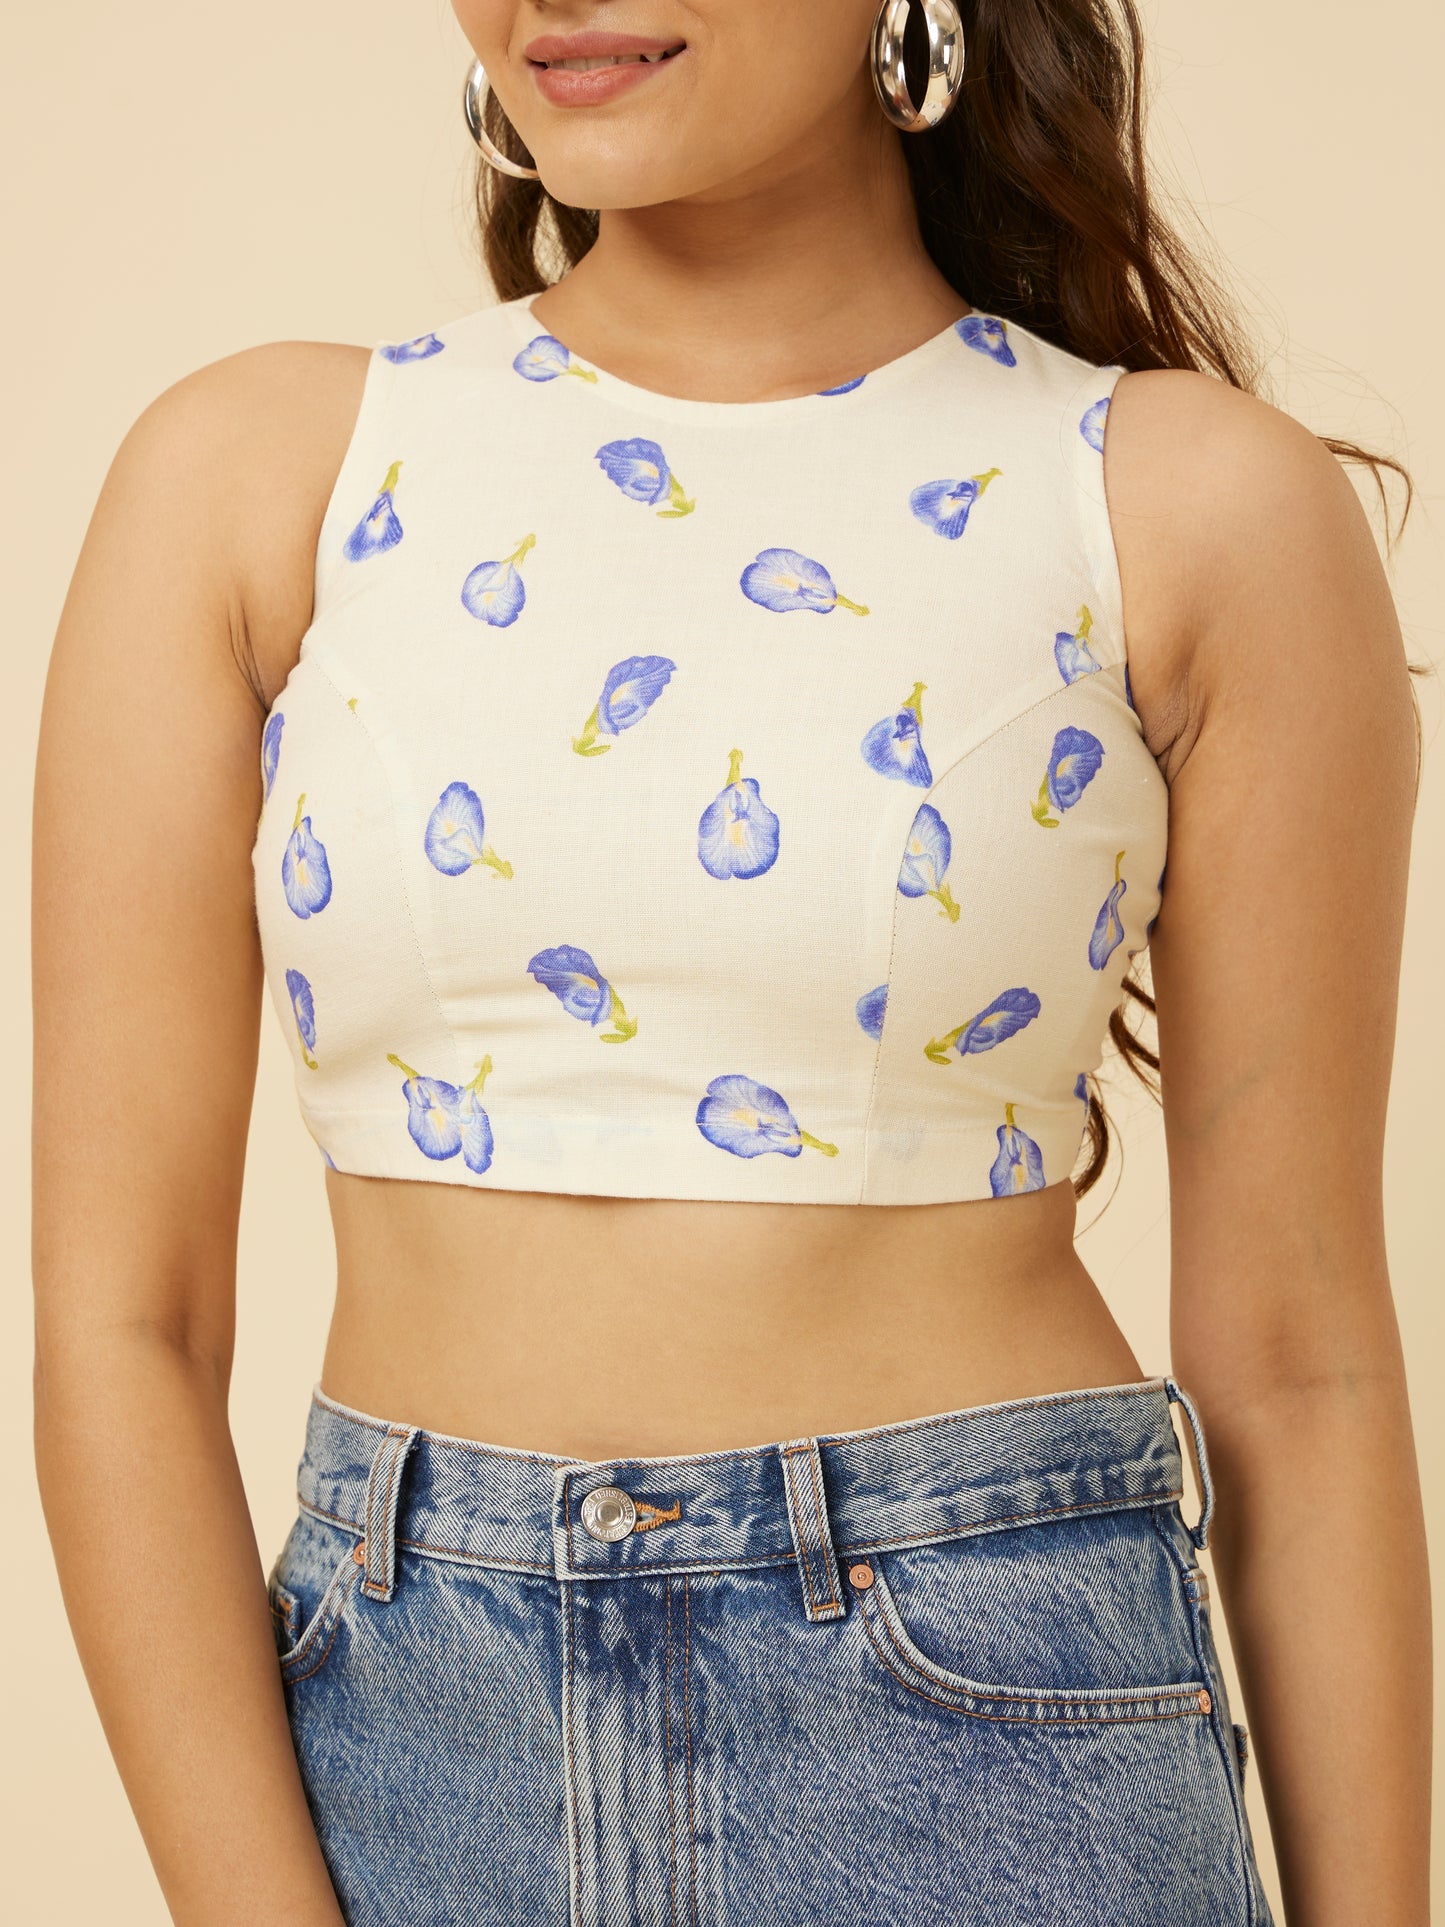 Detailed close-up of Hypsway’s Blue Pea Crop Top, showcasing the intricate blue pea pod design on a creamy fabric, highlighting the crop top’s fine texture and playful summer vibe for a fashionable day out.